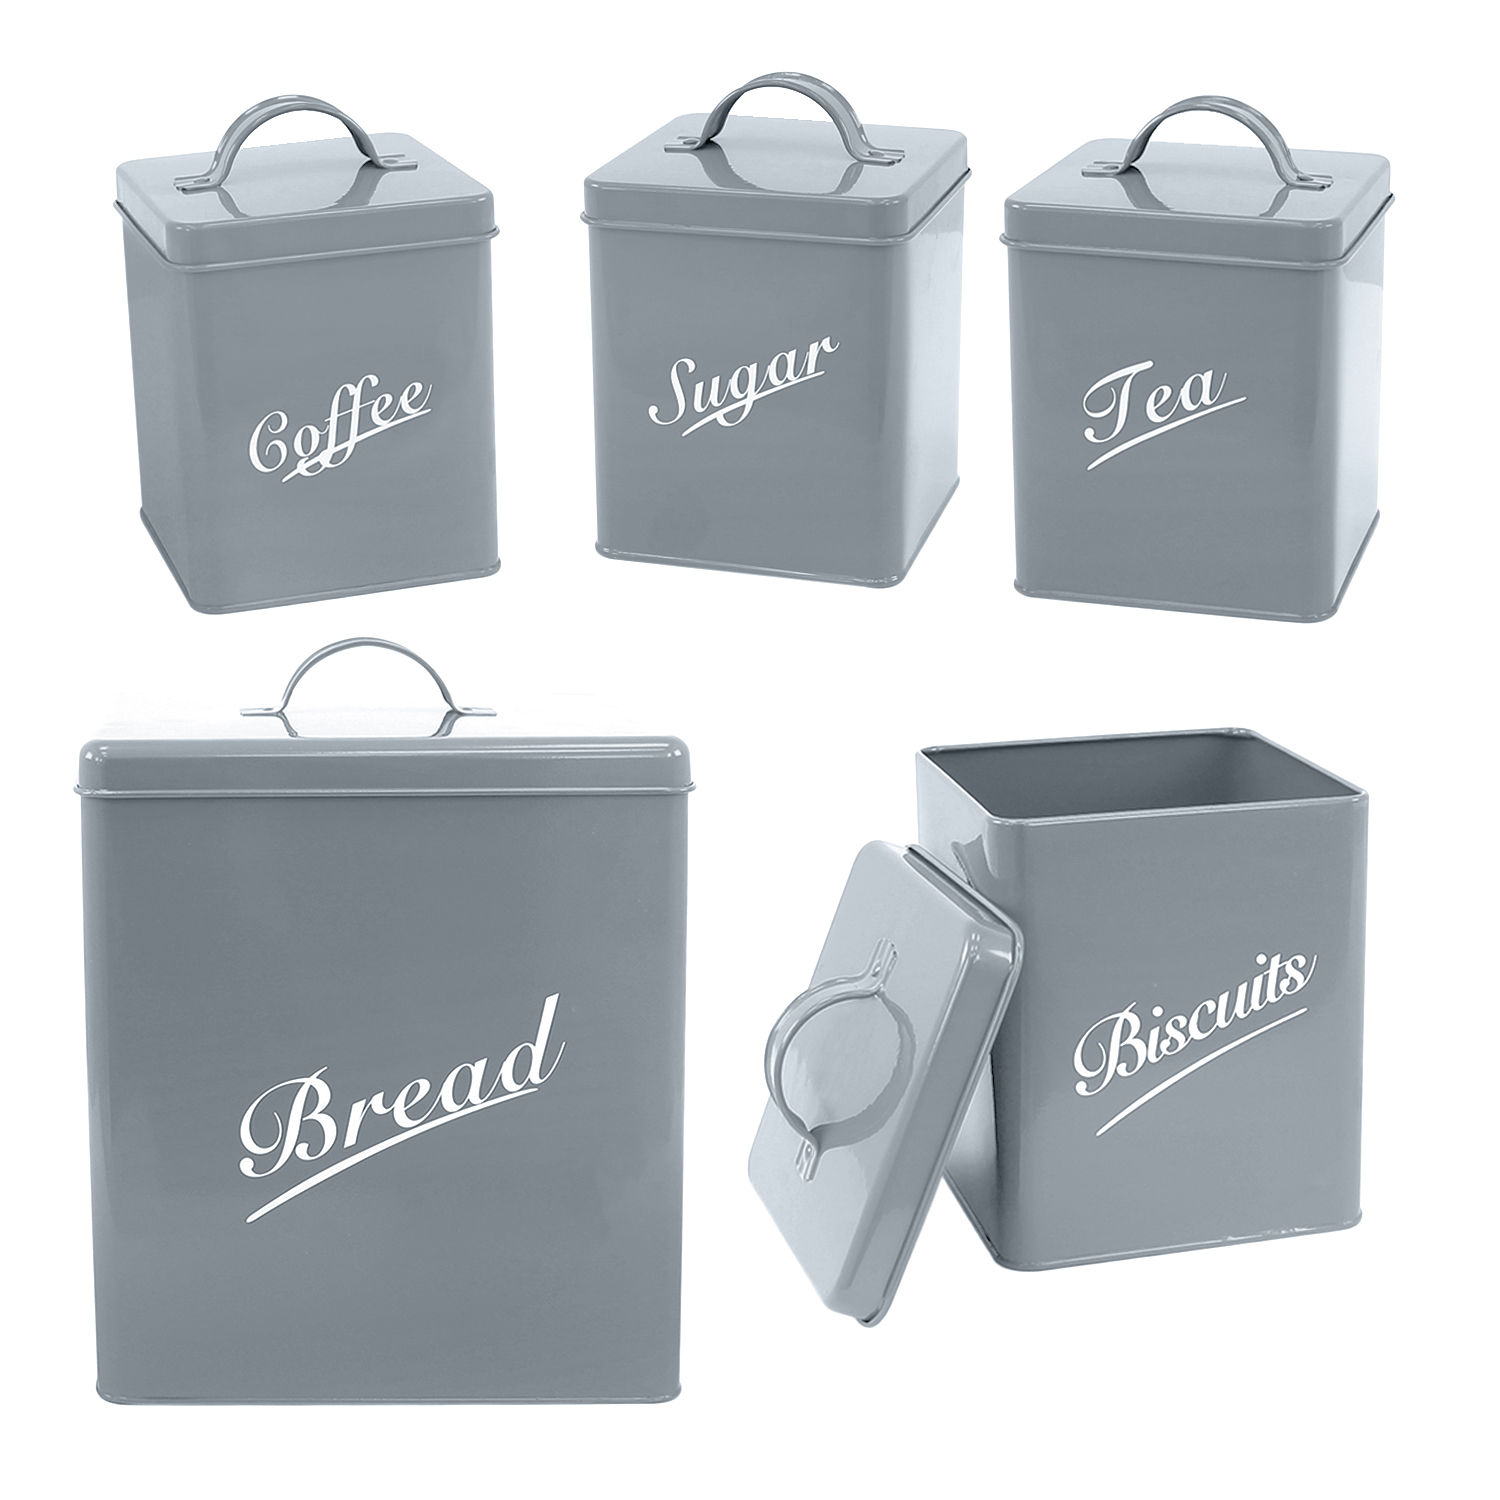 Grey 5 Piece Kitchen Storage Canister Set Tin Containers for Tea Coffee Biscuits & Bread with Copper Detailing Sugar 